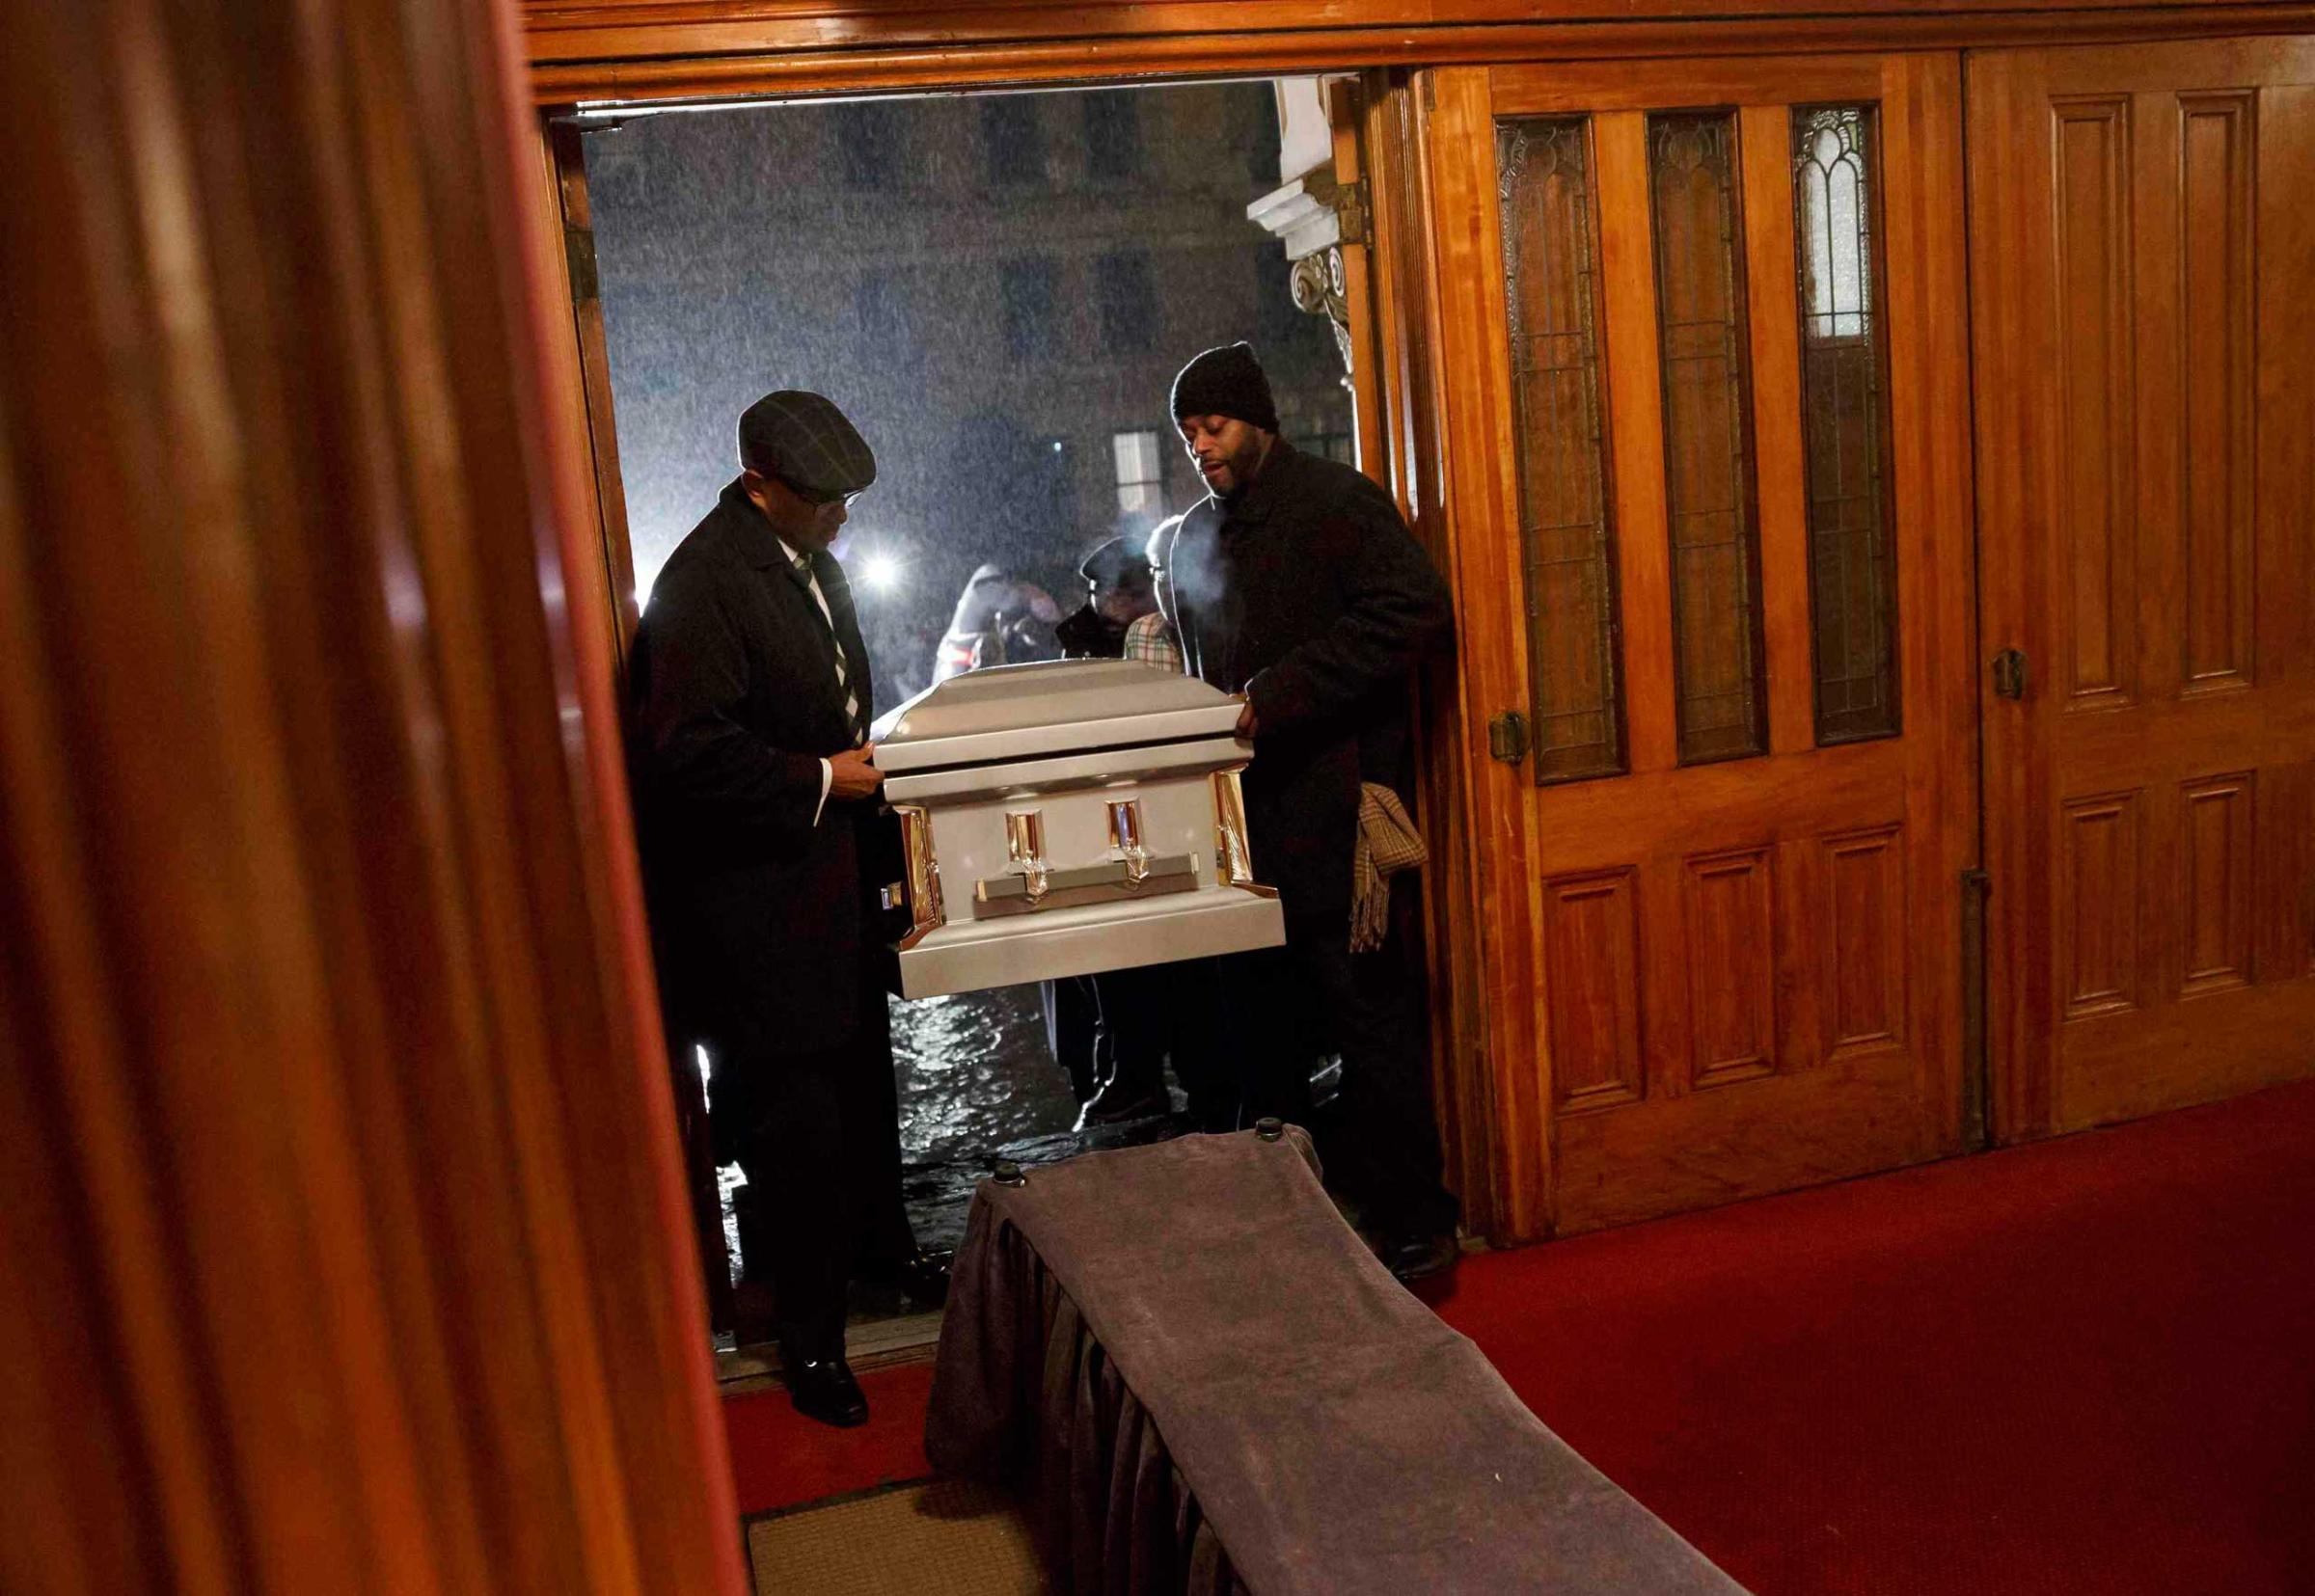 Men carry the coffin of Akai Gurley into the Brown Memorial Baptist Church before his wake in Brooklyn, New York